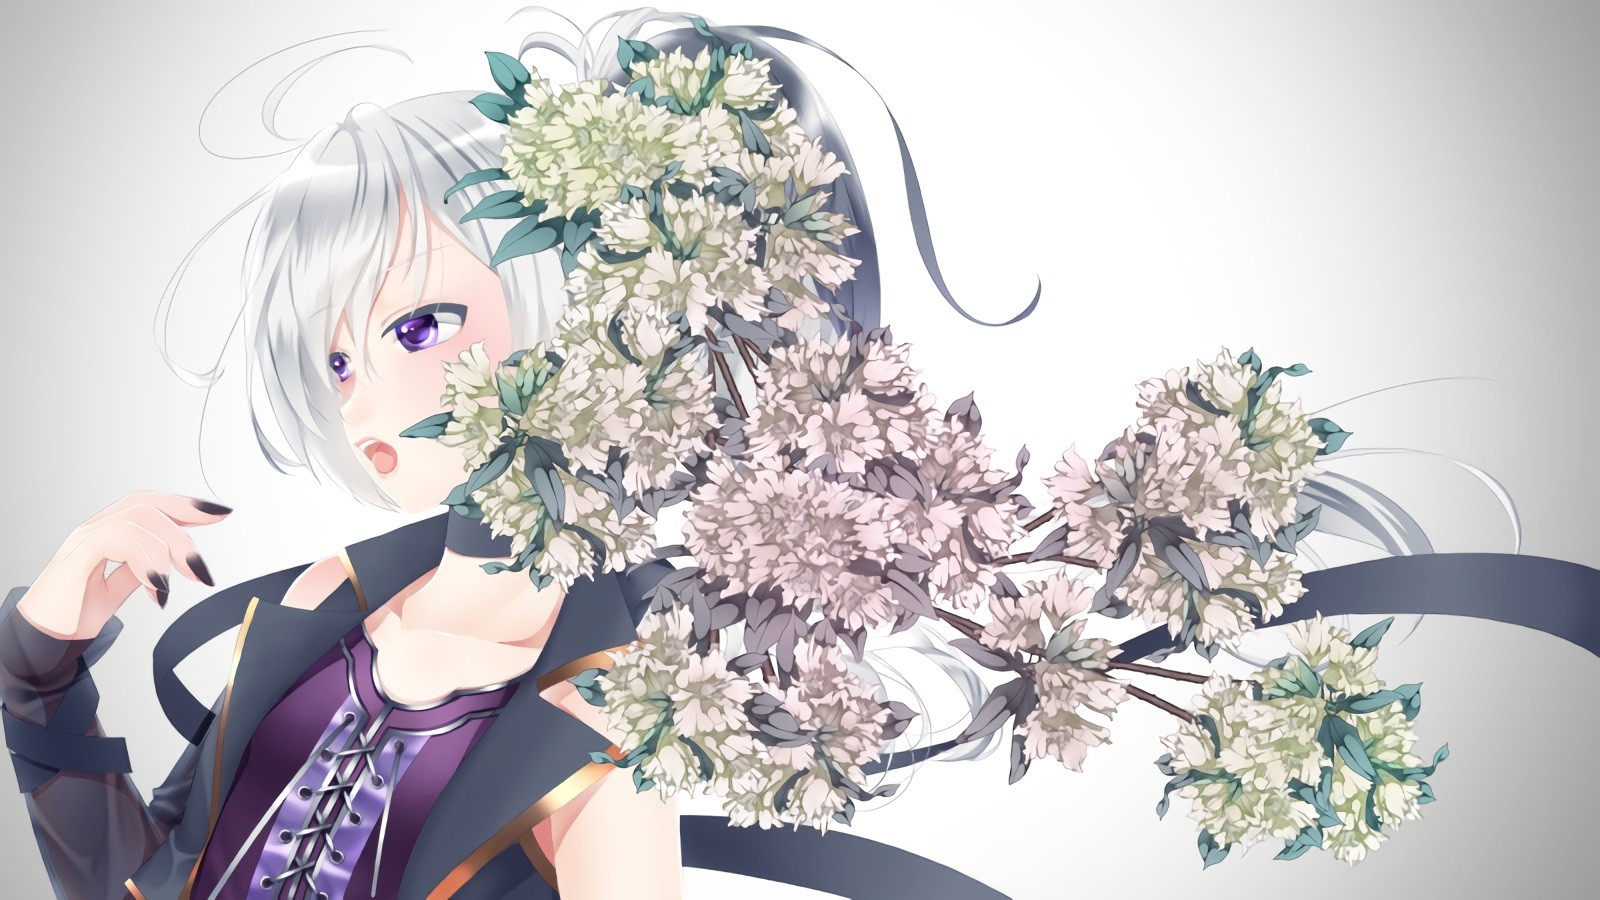 Anime 1600x900 anime anime girls Vocaloid flowers white hair black nails purple eyes Pixiv plants hair in face shoulder length hair simple background looking away women fantasy art fantasy girl open mouth